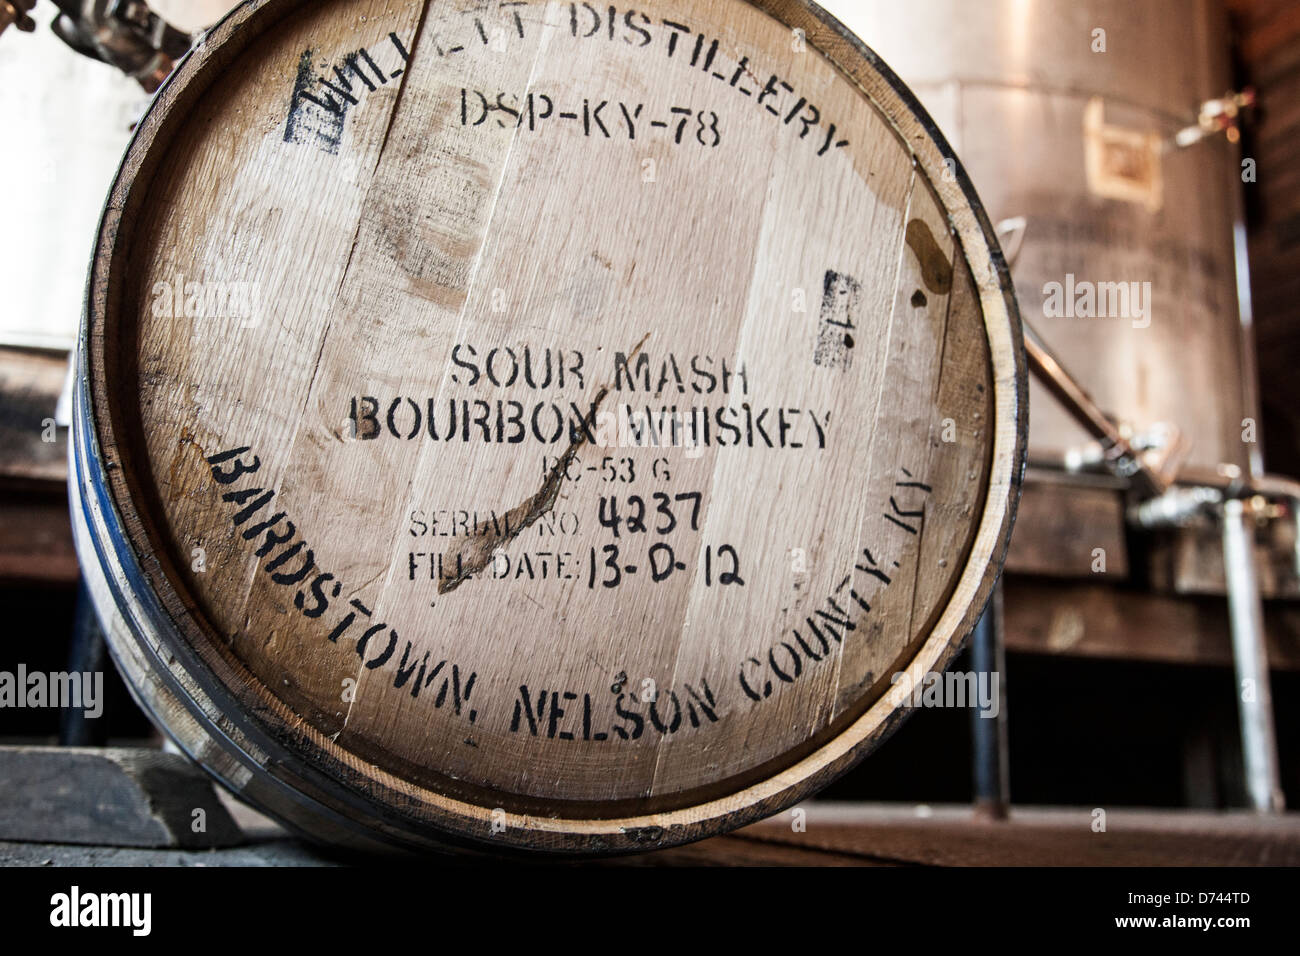 Bourbon barrel being filled Stock Photo